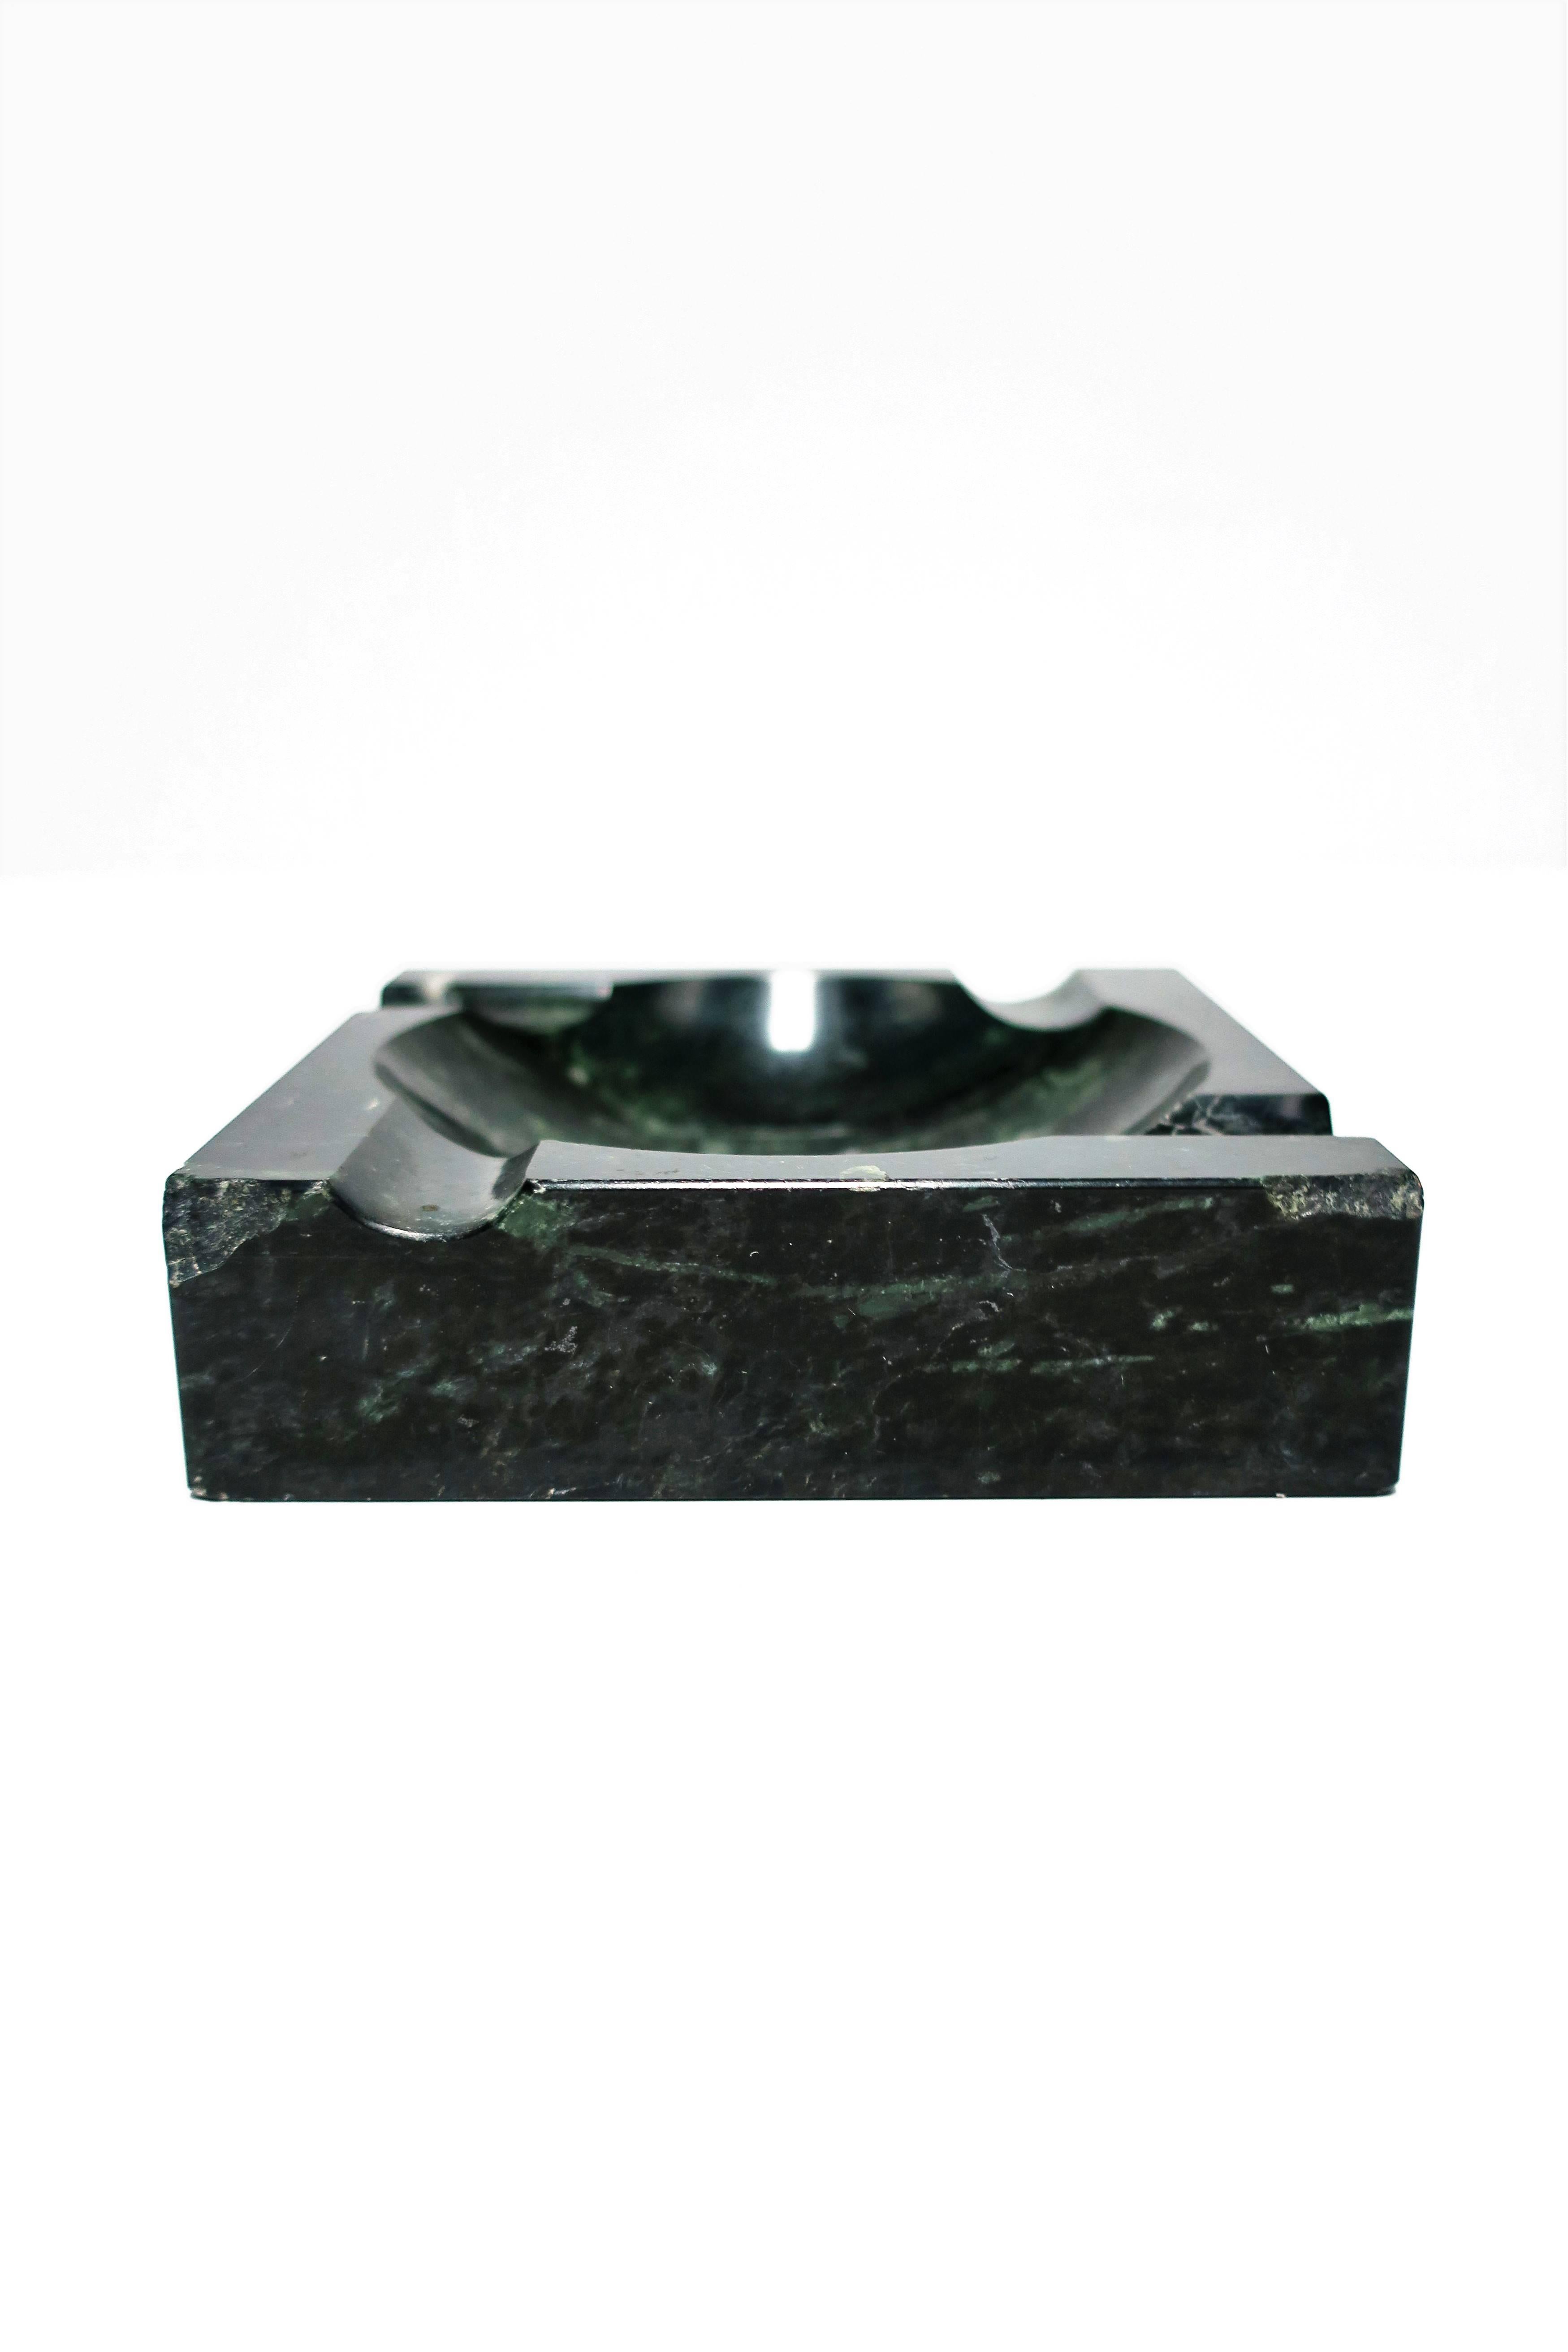 Late 20th Century Vintage Italian Modern Dark Green and White Marble Vessel or Ashtray, 1970s